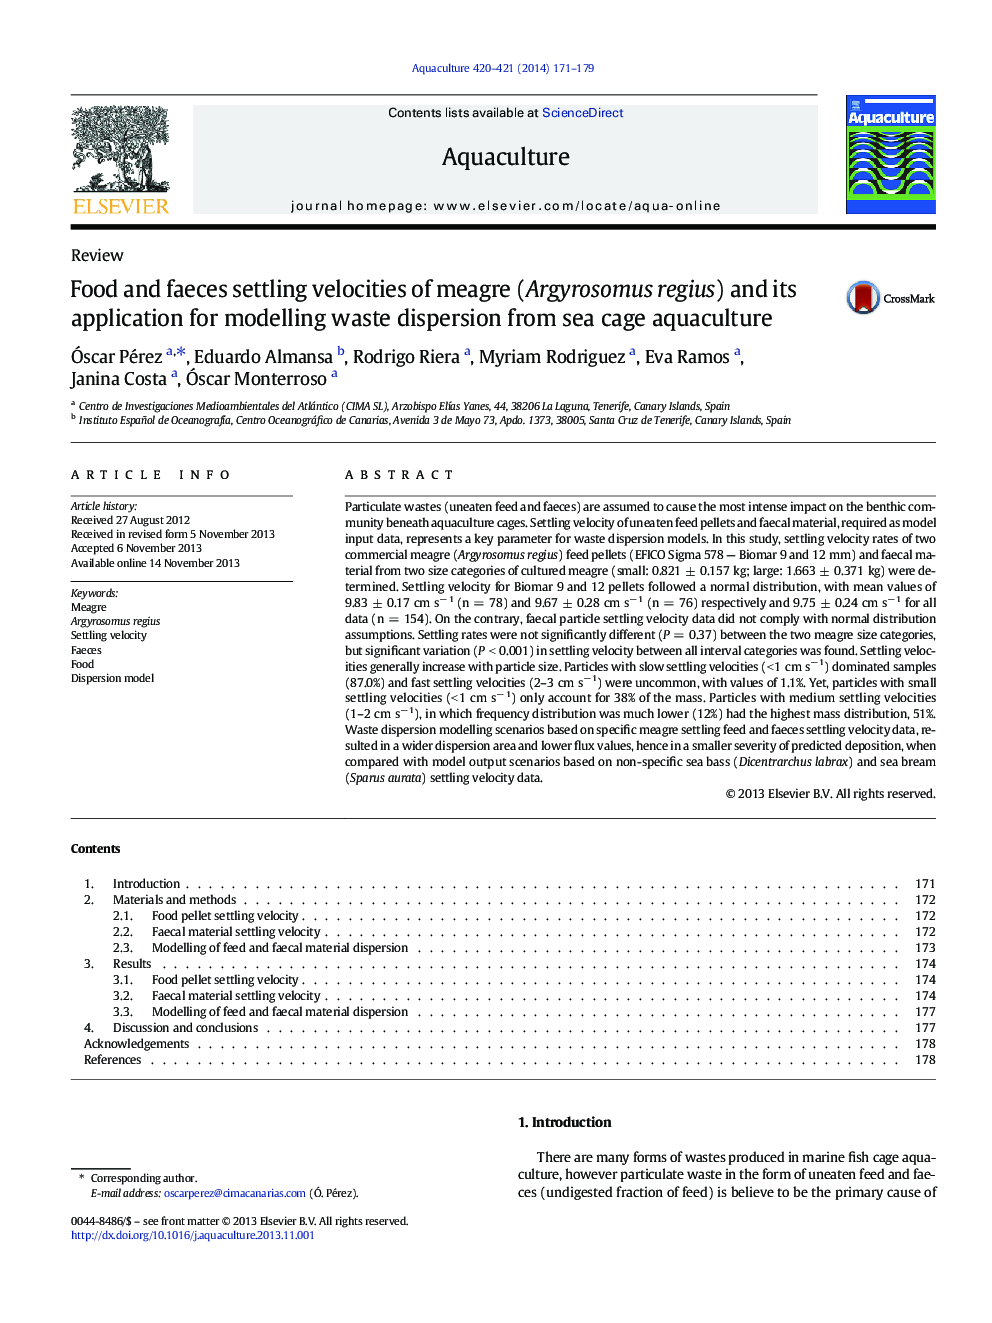 Food and faeces settling velocities of meagre (Argyrosomus regius) and its application for modelling waste dispersion from sea cage aquaculture